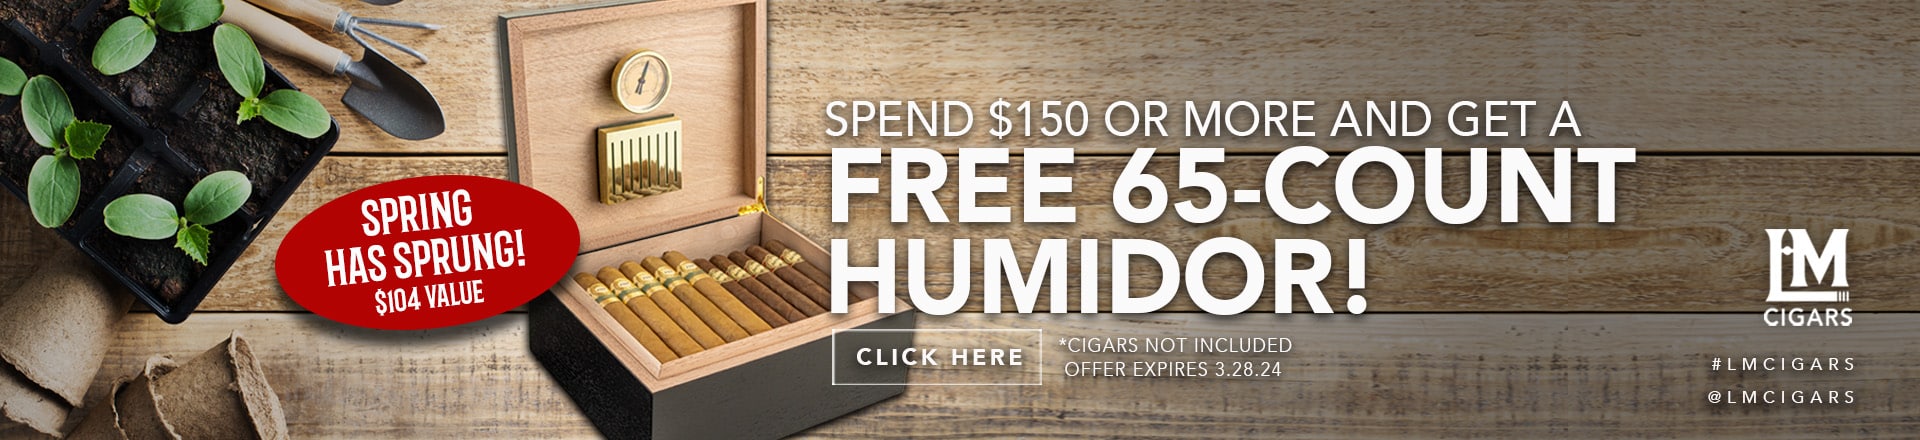 free 65 count humidor with your purchase of $150 or more